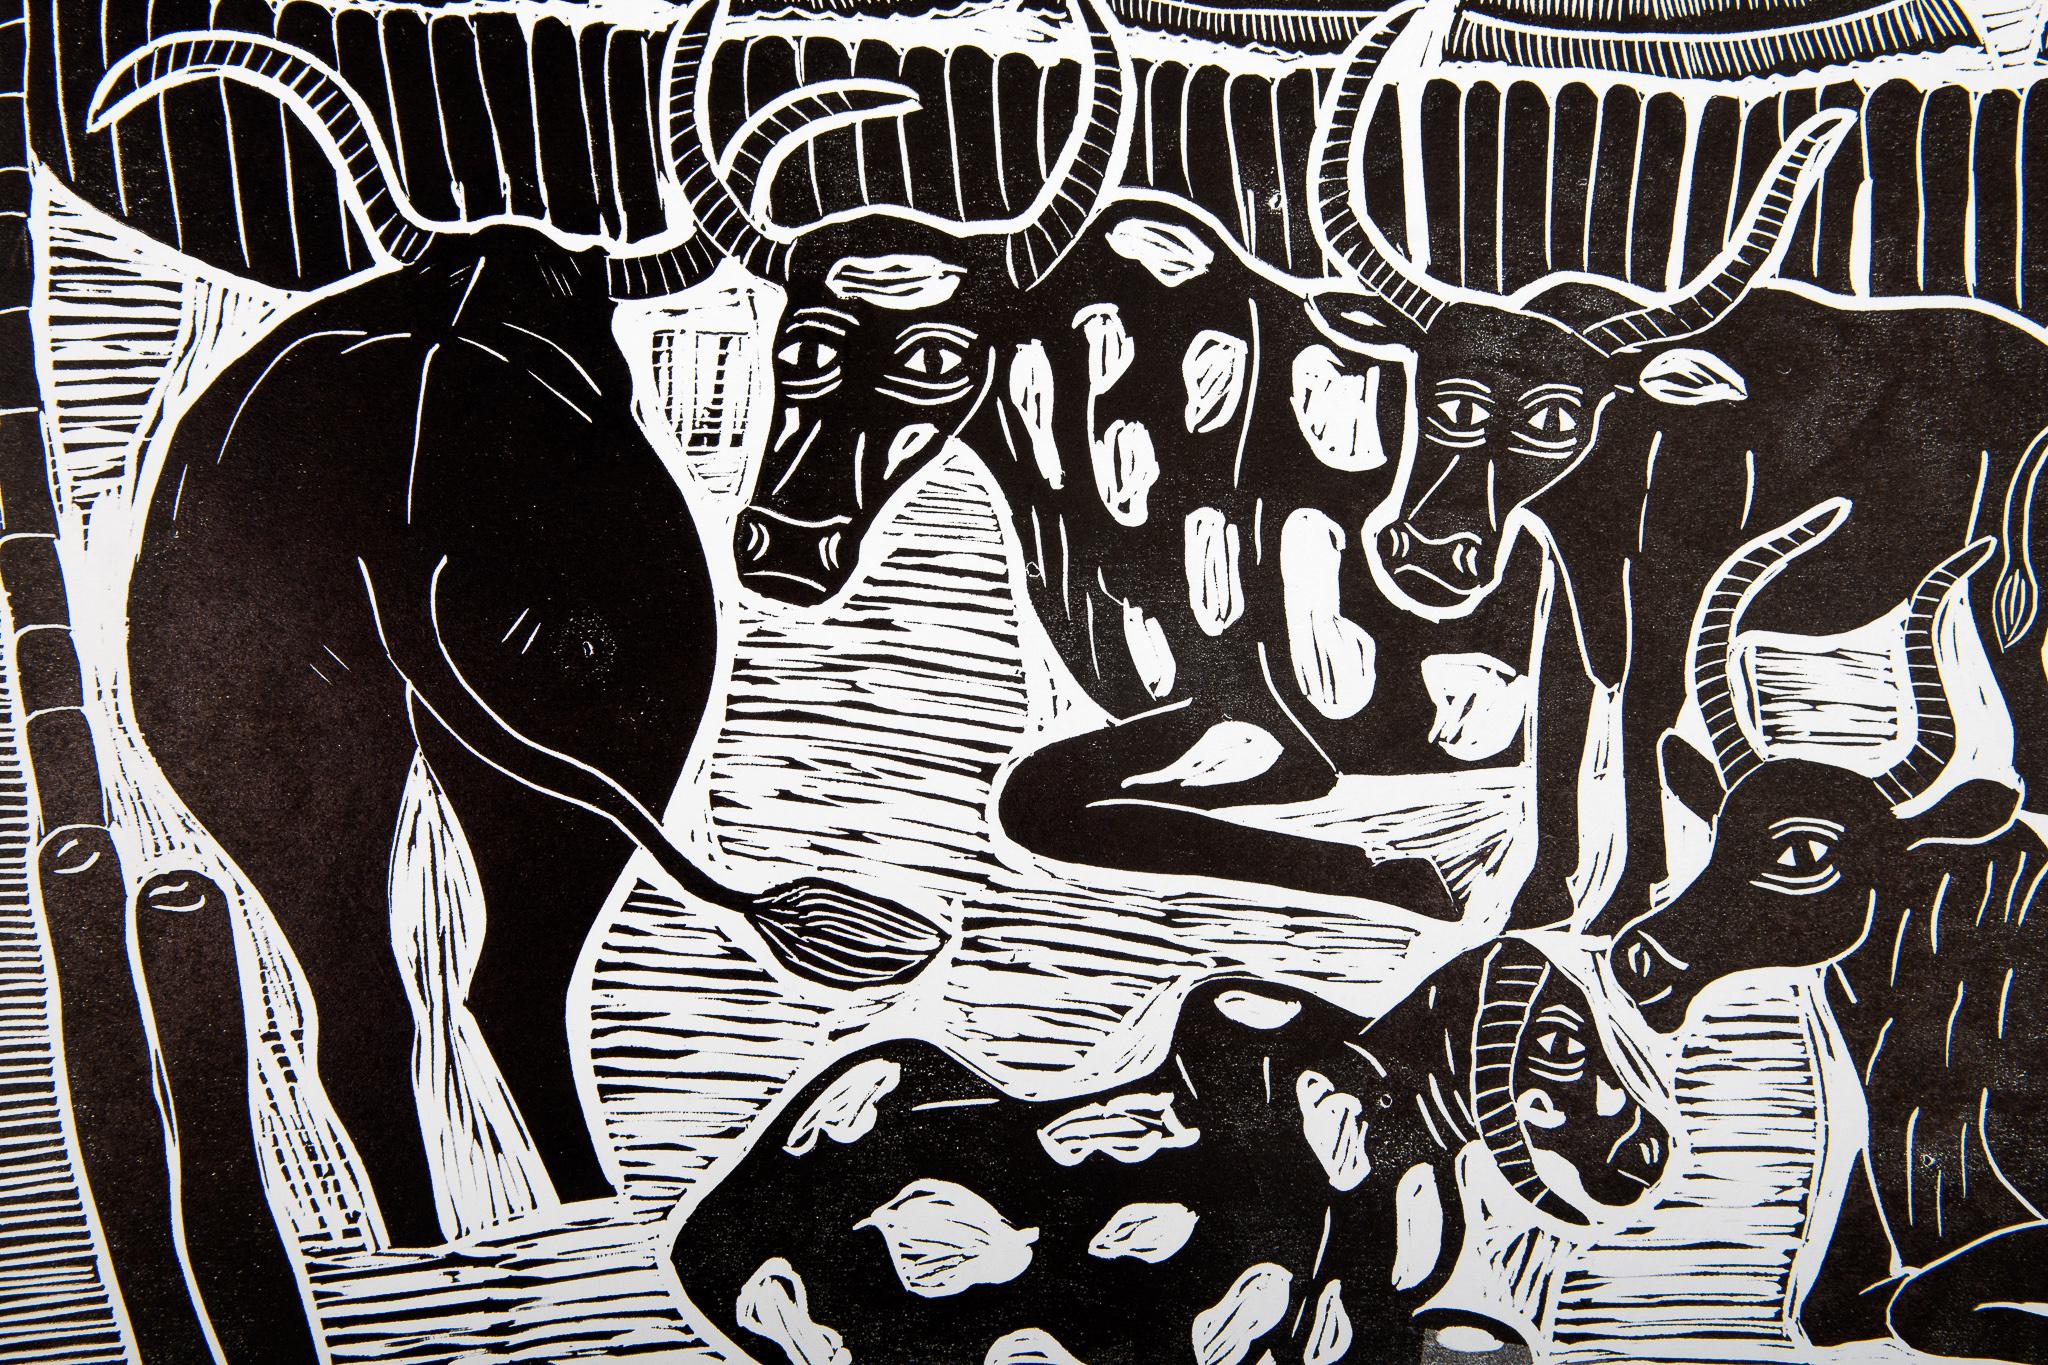 The traditional house of Oukwanyama, 2019. Linoleum block print on paper. Edition of 4.

Elia Shiwoohamba was born in 1981 in Windhoek, Namibia. He graduated from the John Muafangejo Art Centre in Windhoek in 2006. Specialising in printmaking and